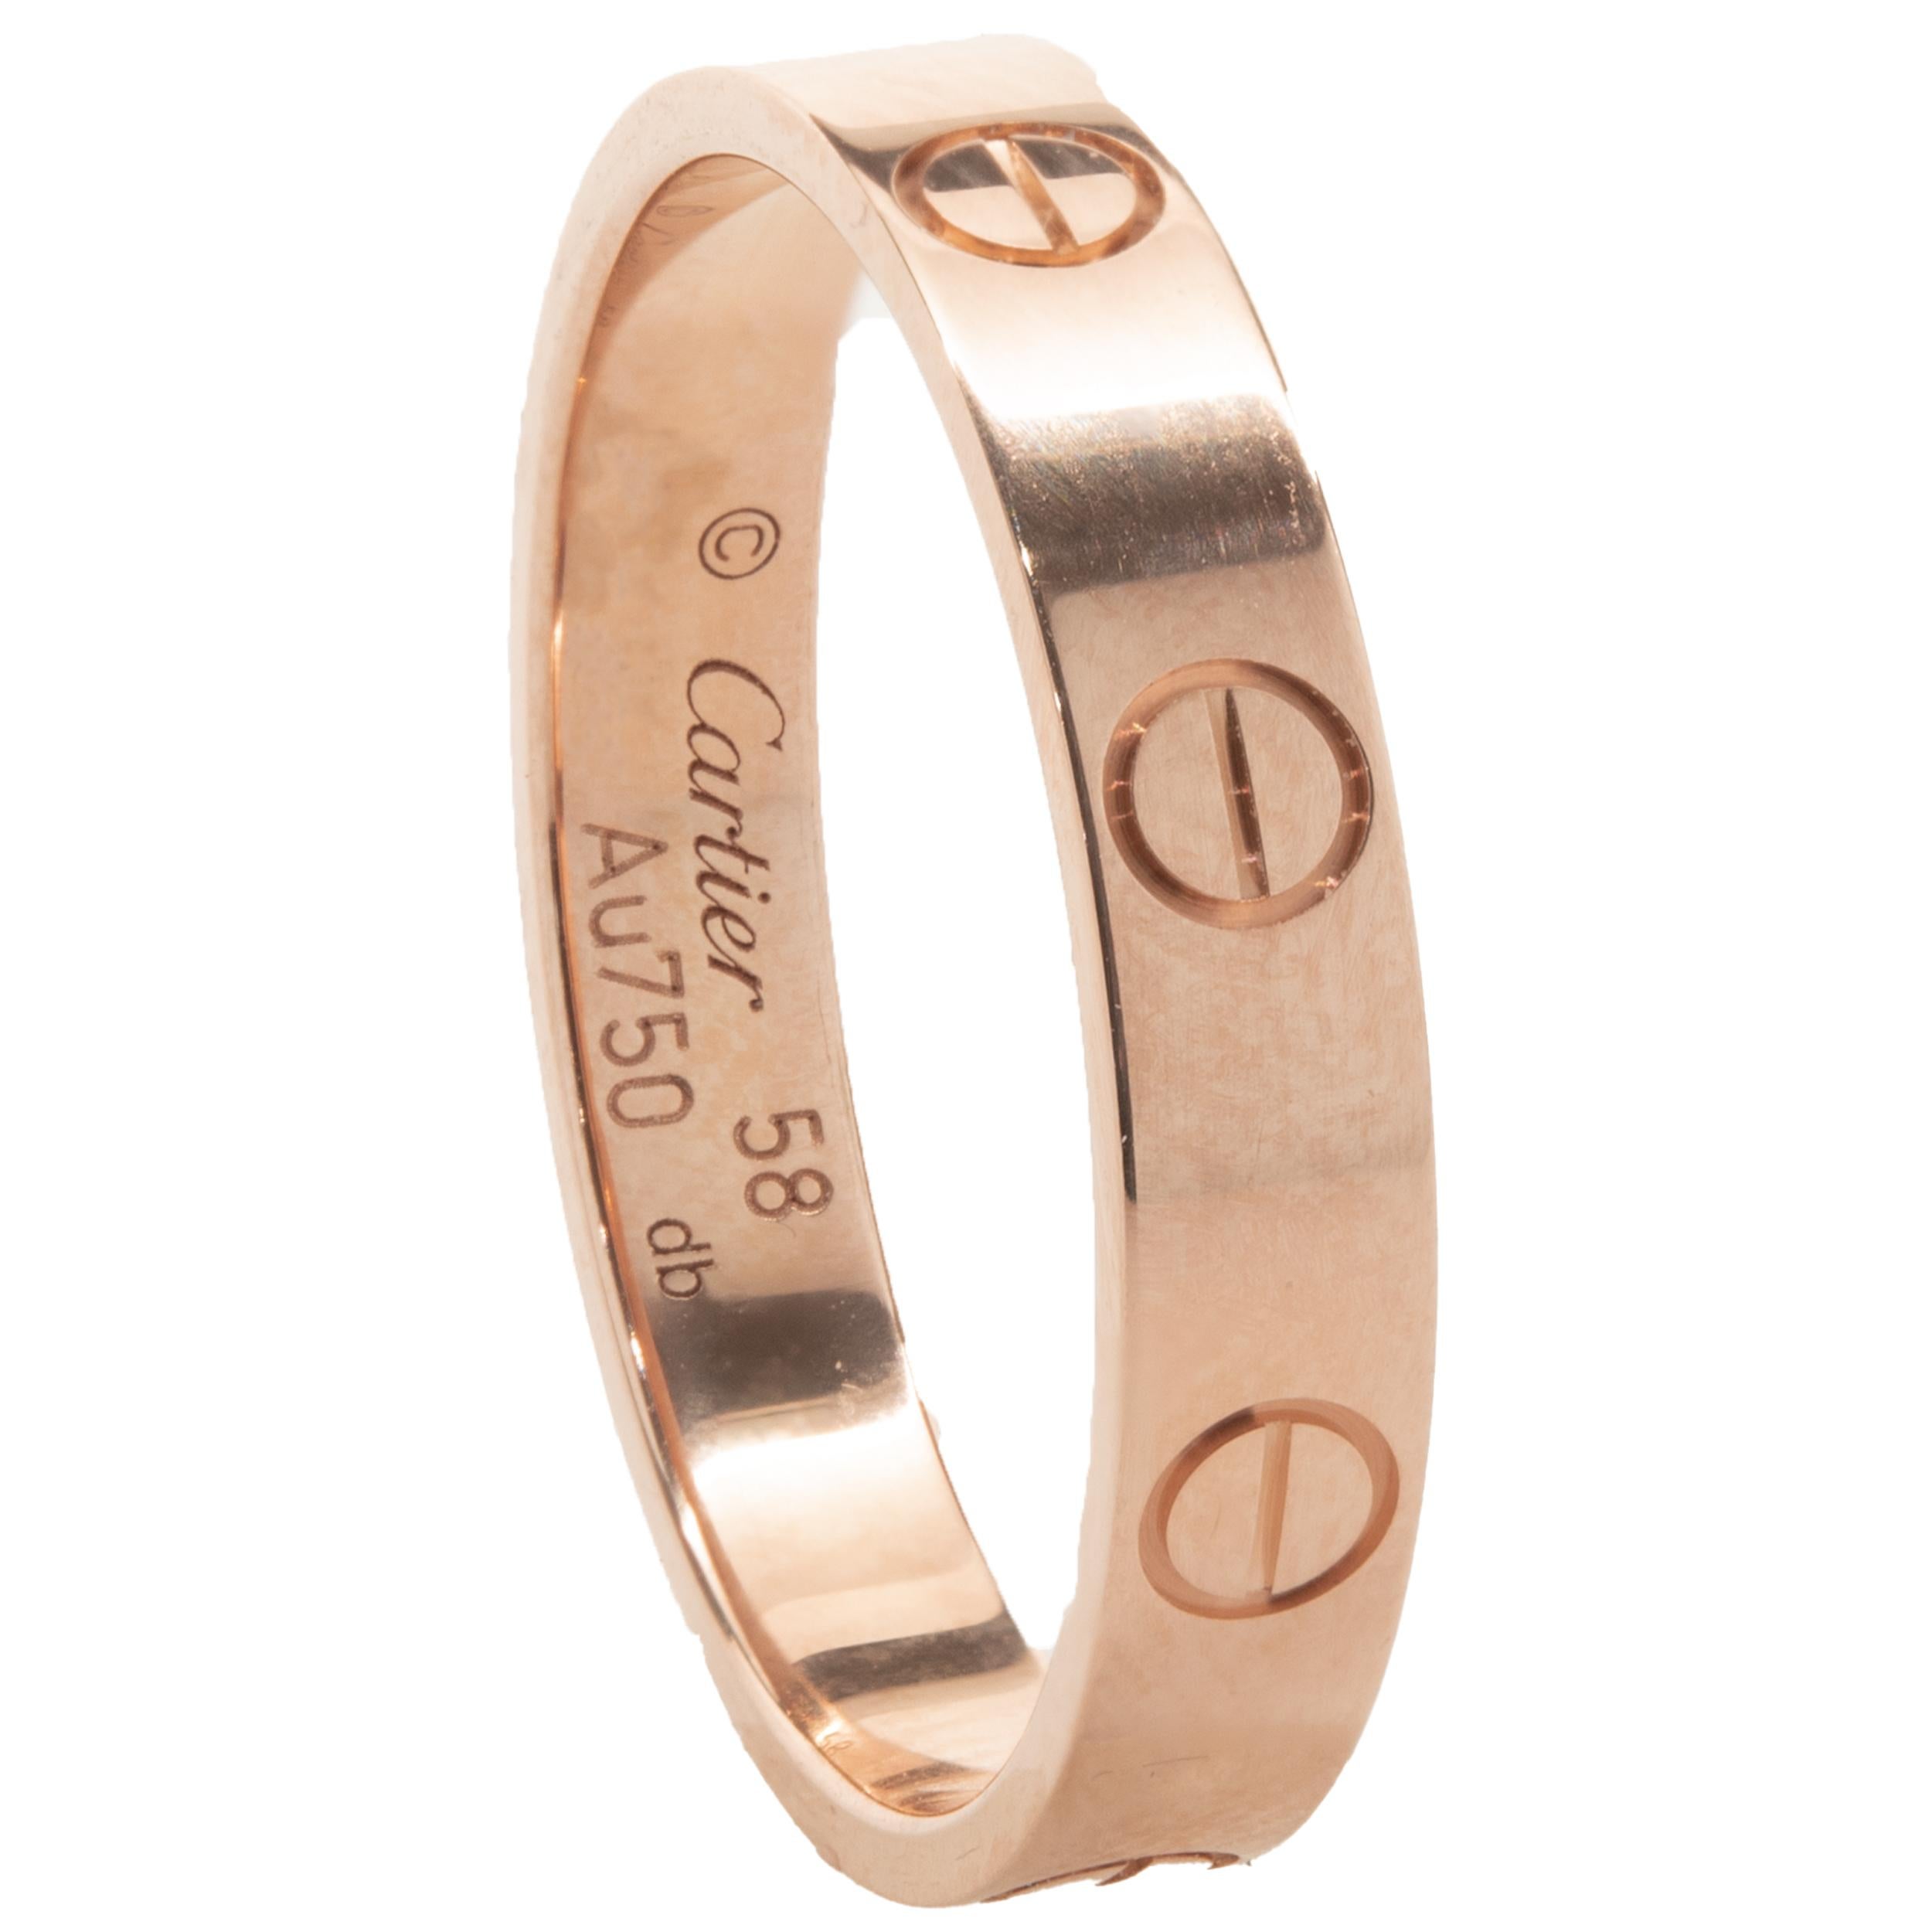 Designer: Cartier
Material: 18K rose gold
Dimensions: ring top measures 3.7mm wide
Weight: 3.63 grams
Size: 58 (8.25 US)
Serial # OLFXXX

Complete with original box and papers
Guaranteed authentic by seller